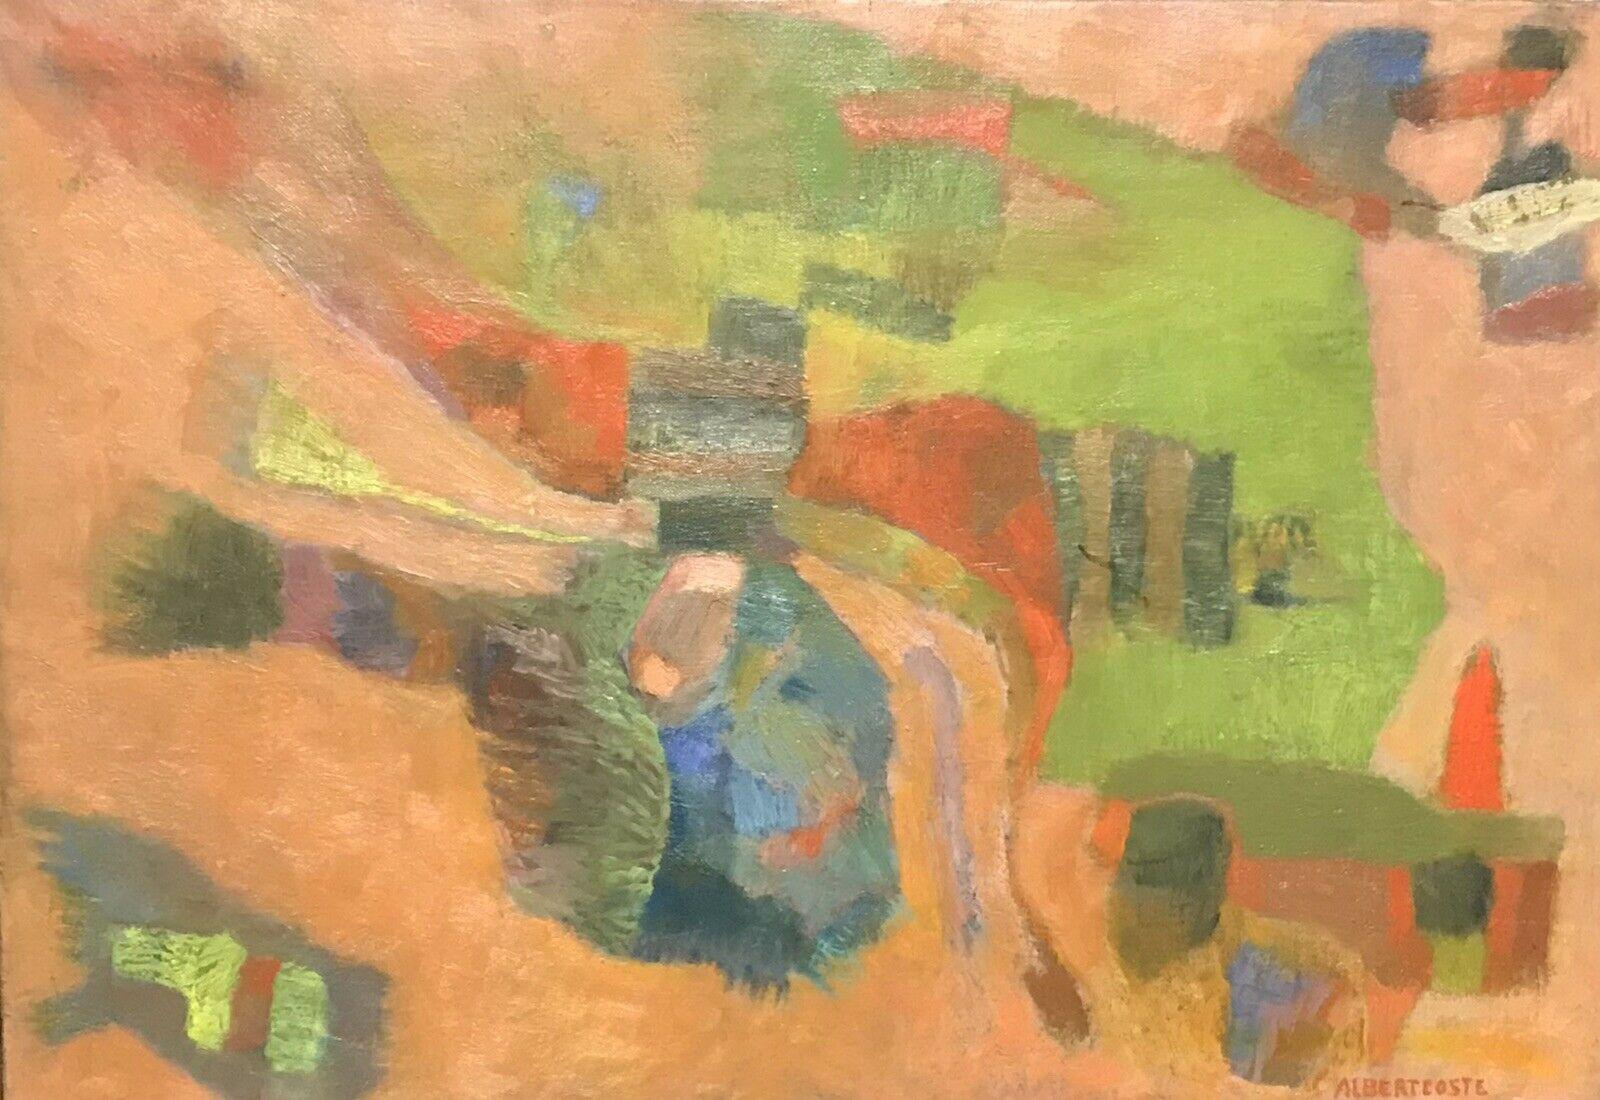 ALBERT COSTE (1896-1985)  Abstract Painting - 1950's SIGNED FRENCH CUBIST OIL PAINTING - BEAUTIFUL ORANGE BLUE GREEN COLORS